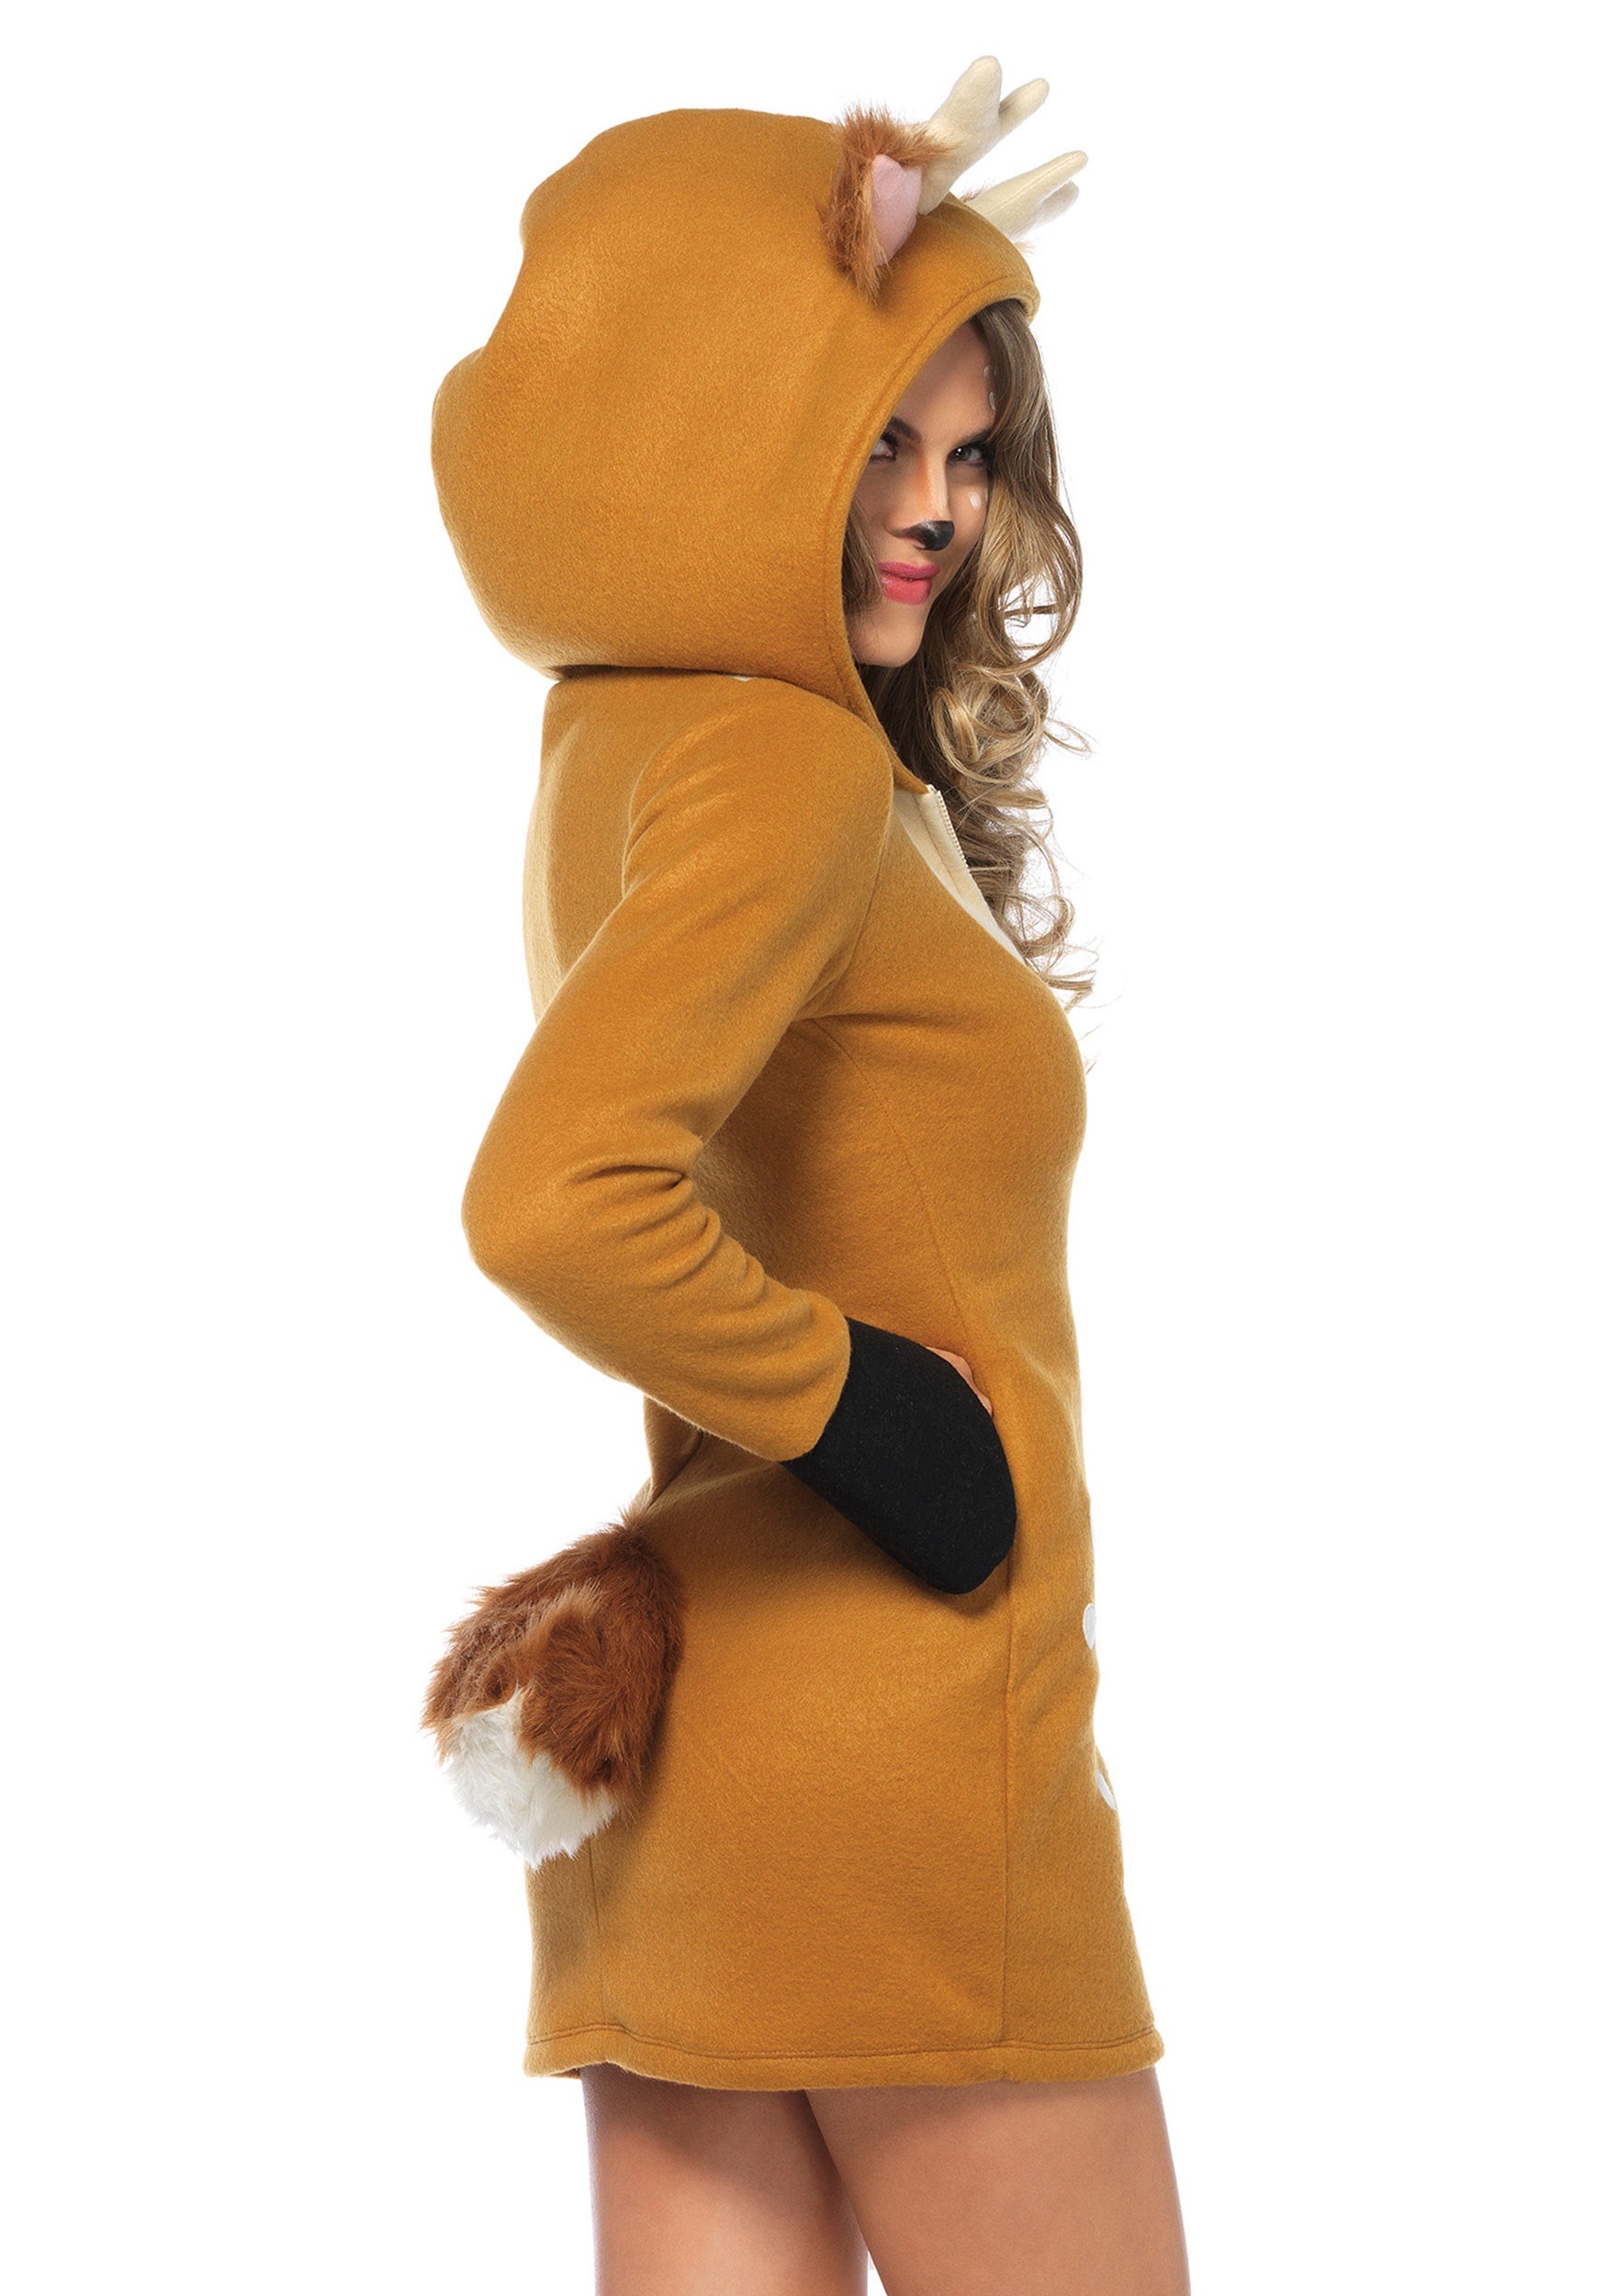 Cozy Fawn Costume For Women